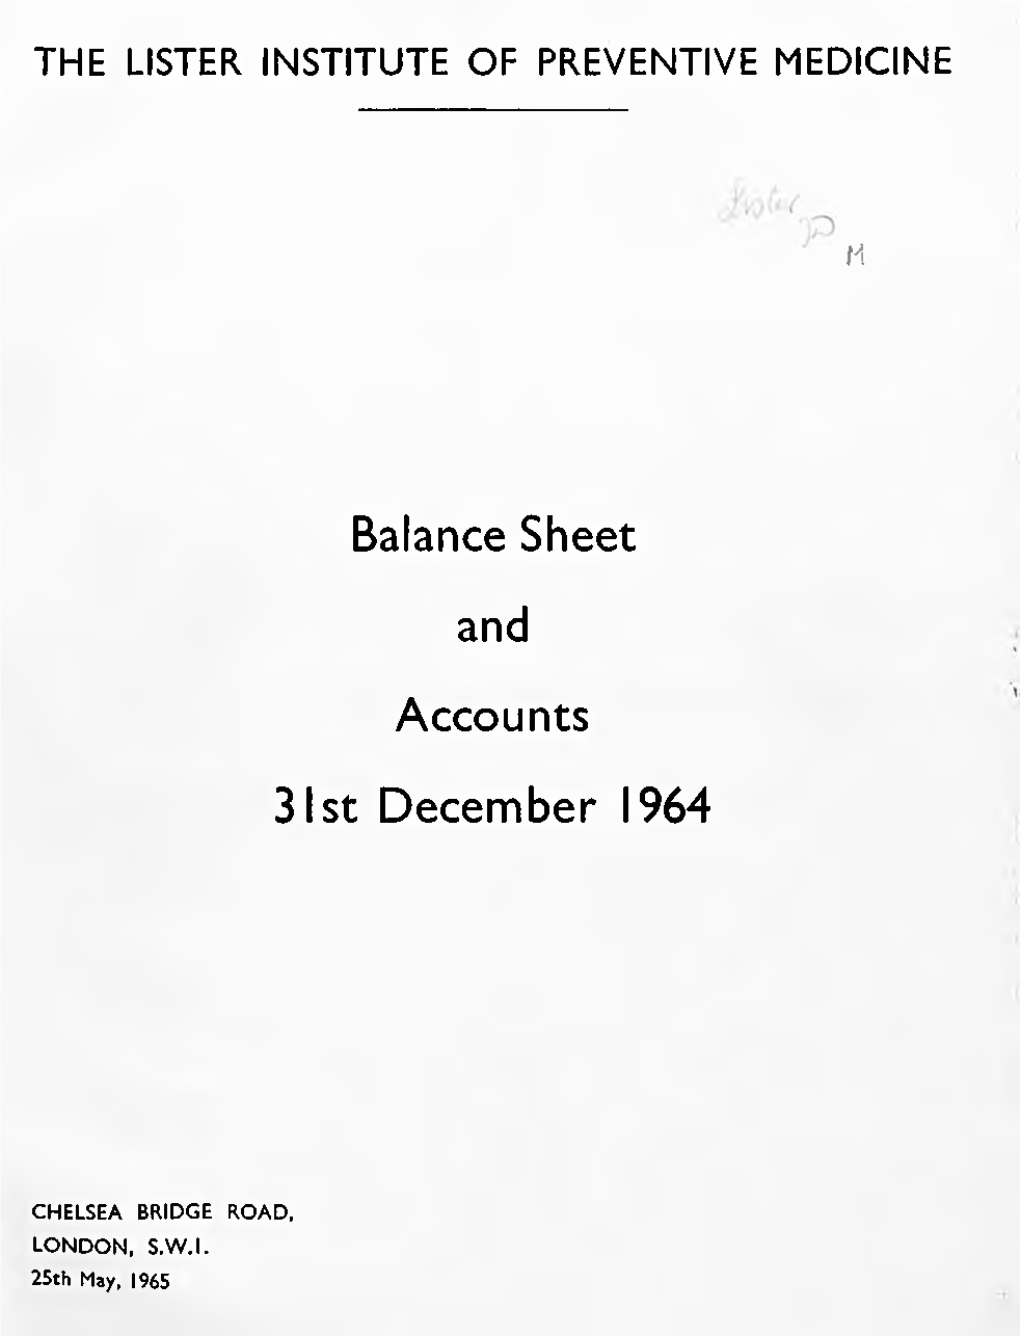 1965 to 1971 Lister Annual Report and Accounts